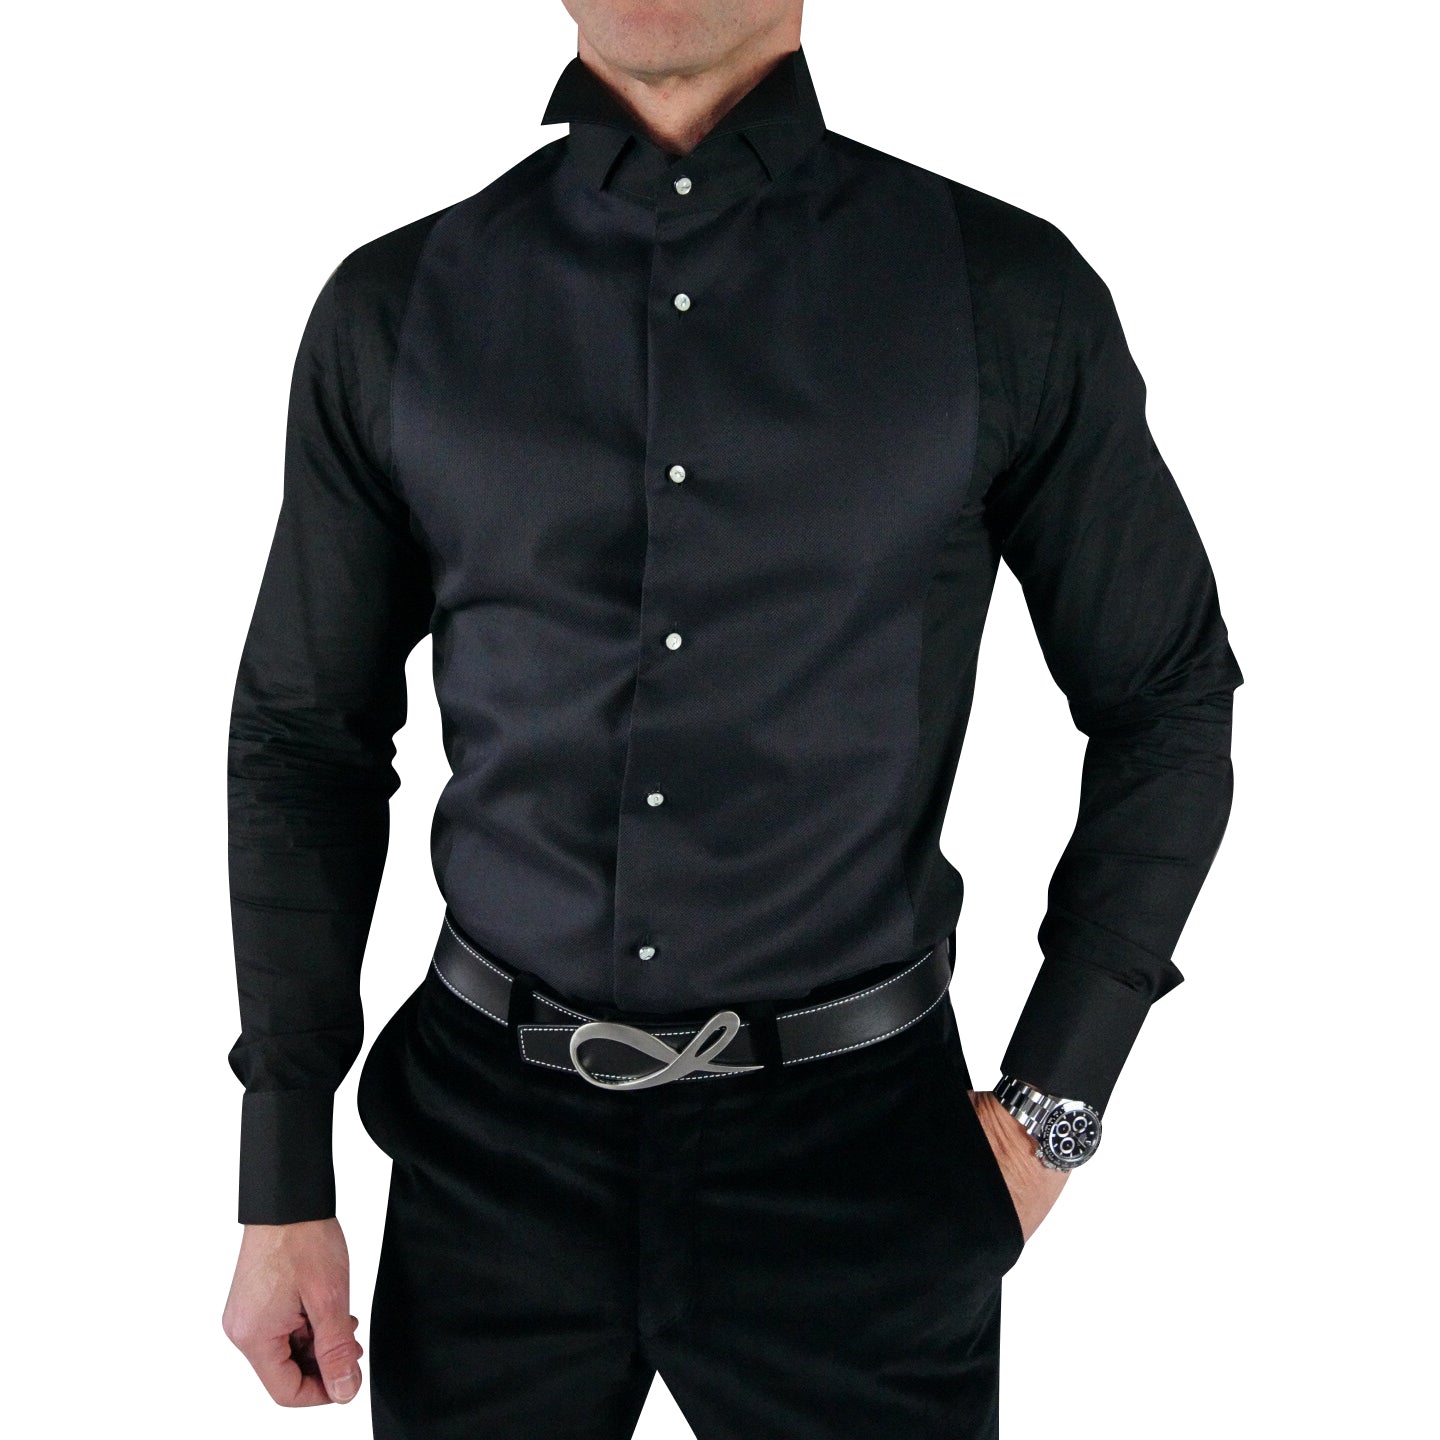 Martino Collection By Henry Segal Men's Black Tuxedo Shirt Size M 32-33